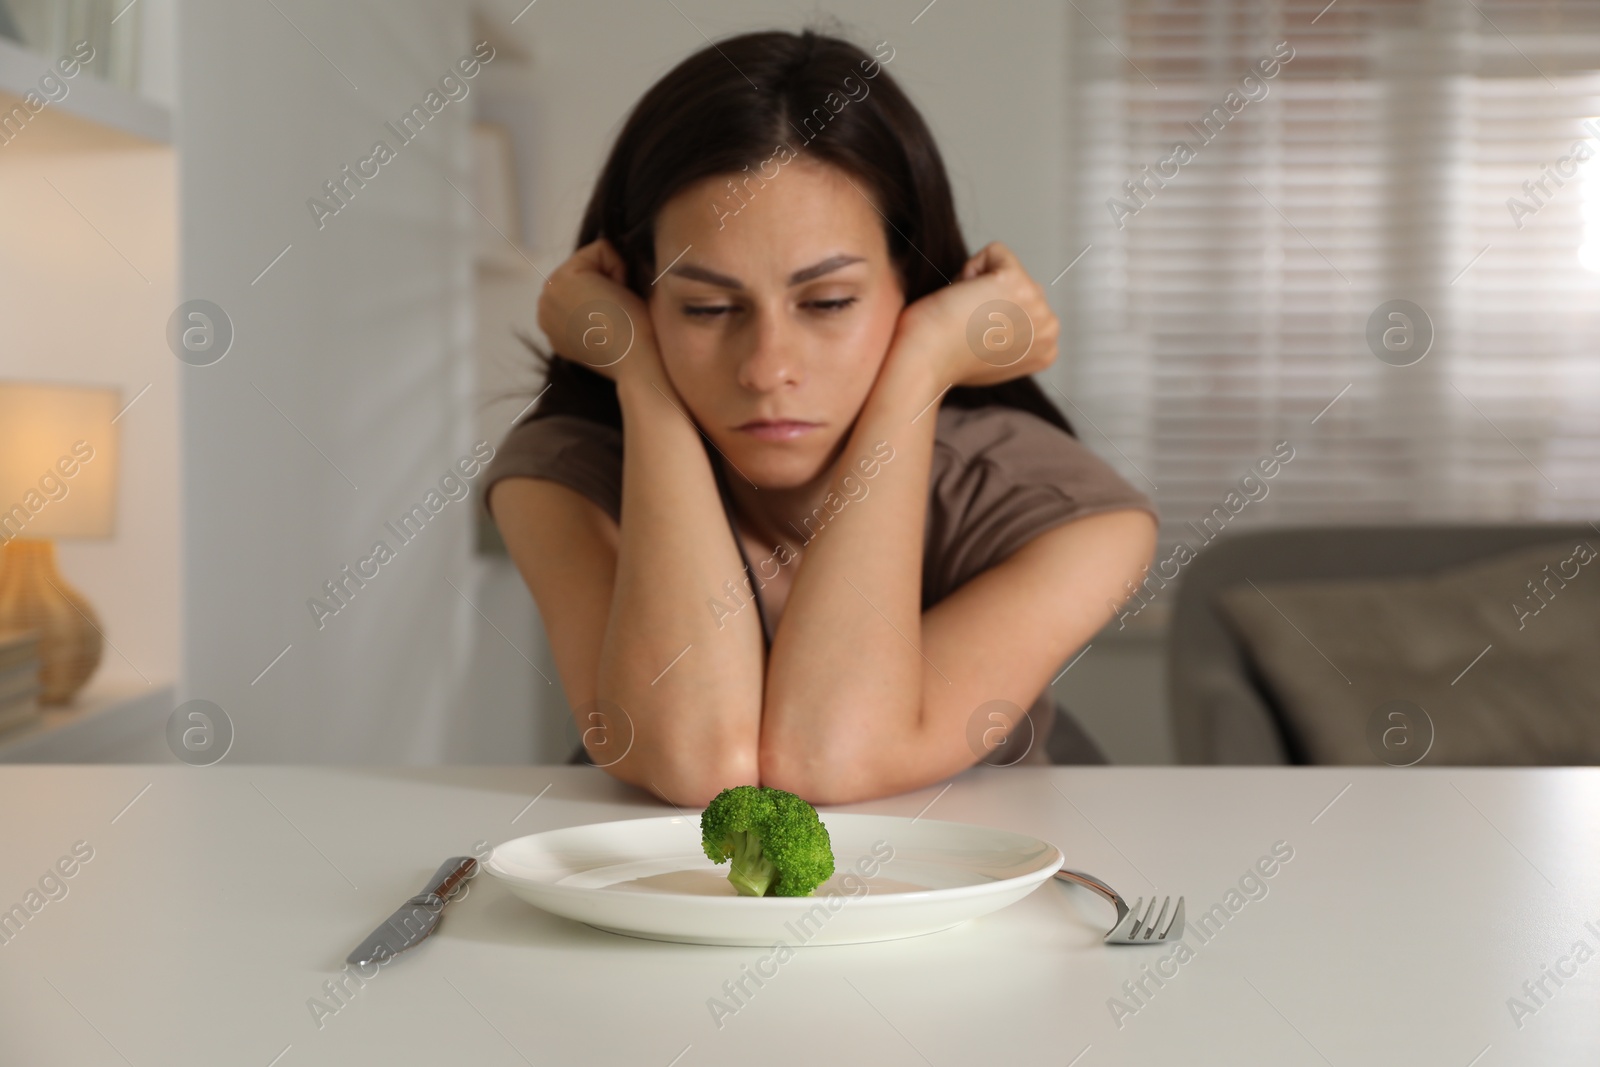 Photo of Eating disorder. Sad woman at white table with cutlery, broccoli and plate indoors